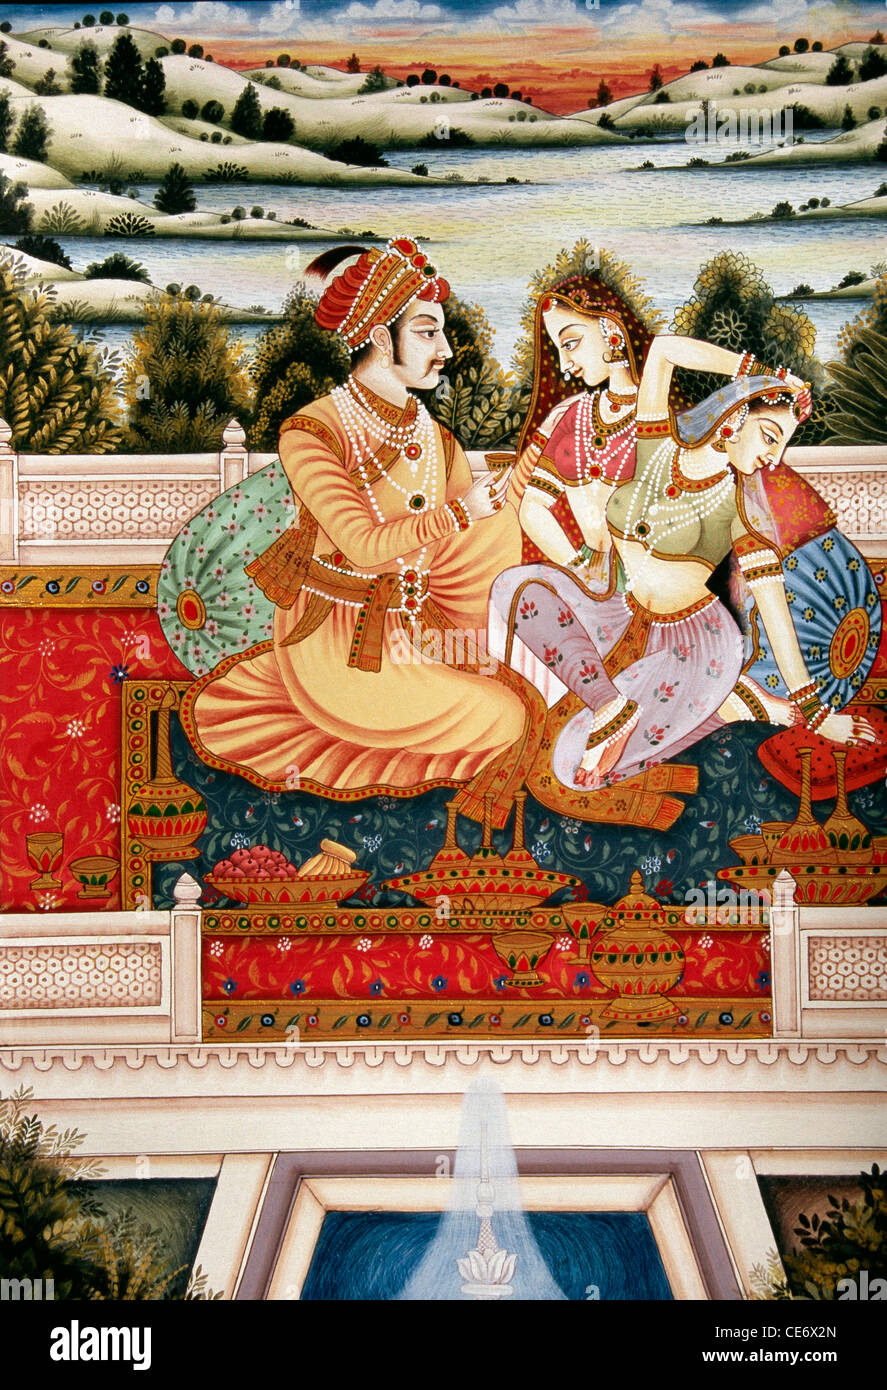 Miniature painting of Mughal Emperor King Maharaja with his wife Empress Queen Maharani two wives Queens relaxing in the garden ; India ; Asia Stock Photo